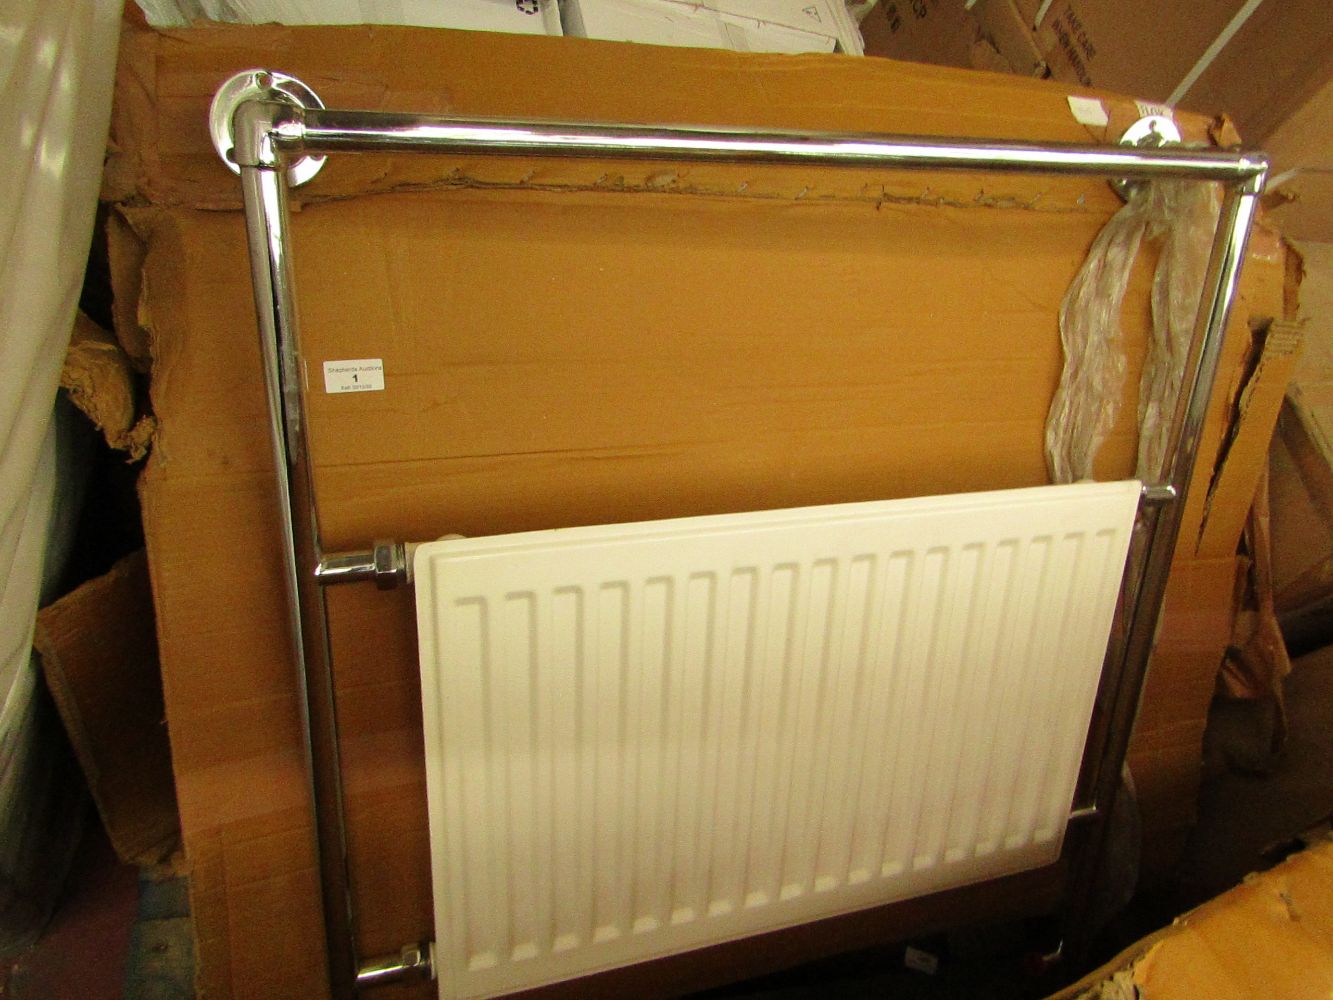 New Delivery of Bathroom and Radiator stock from Brands such as Roca, Old London and More